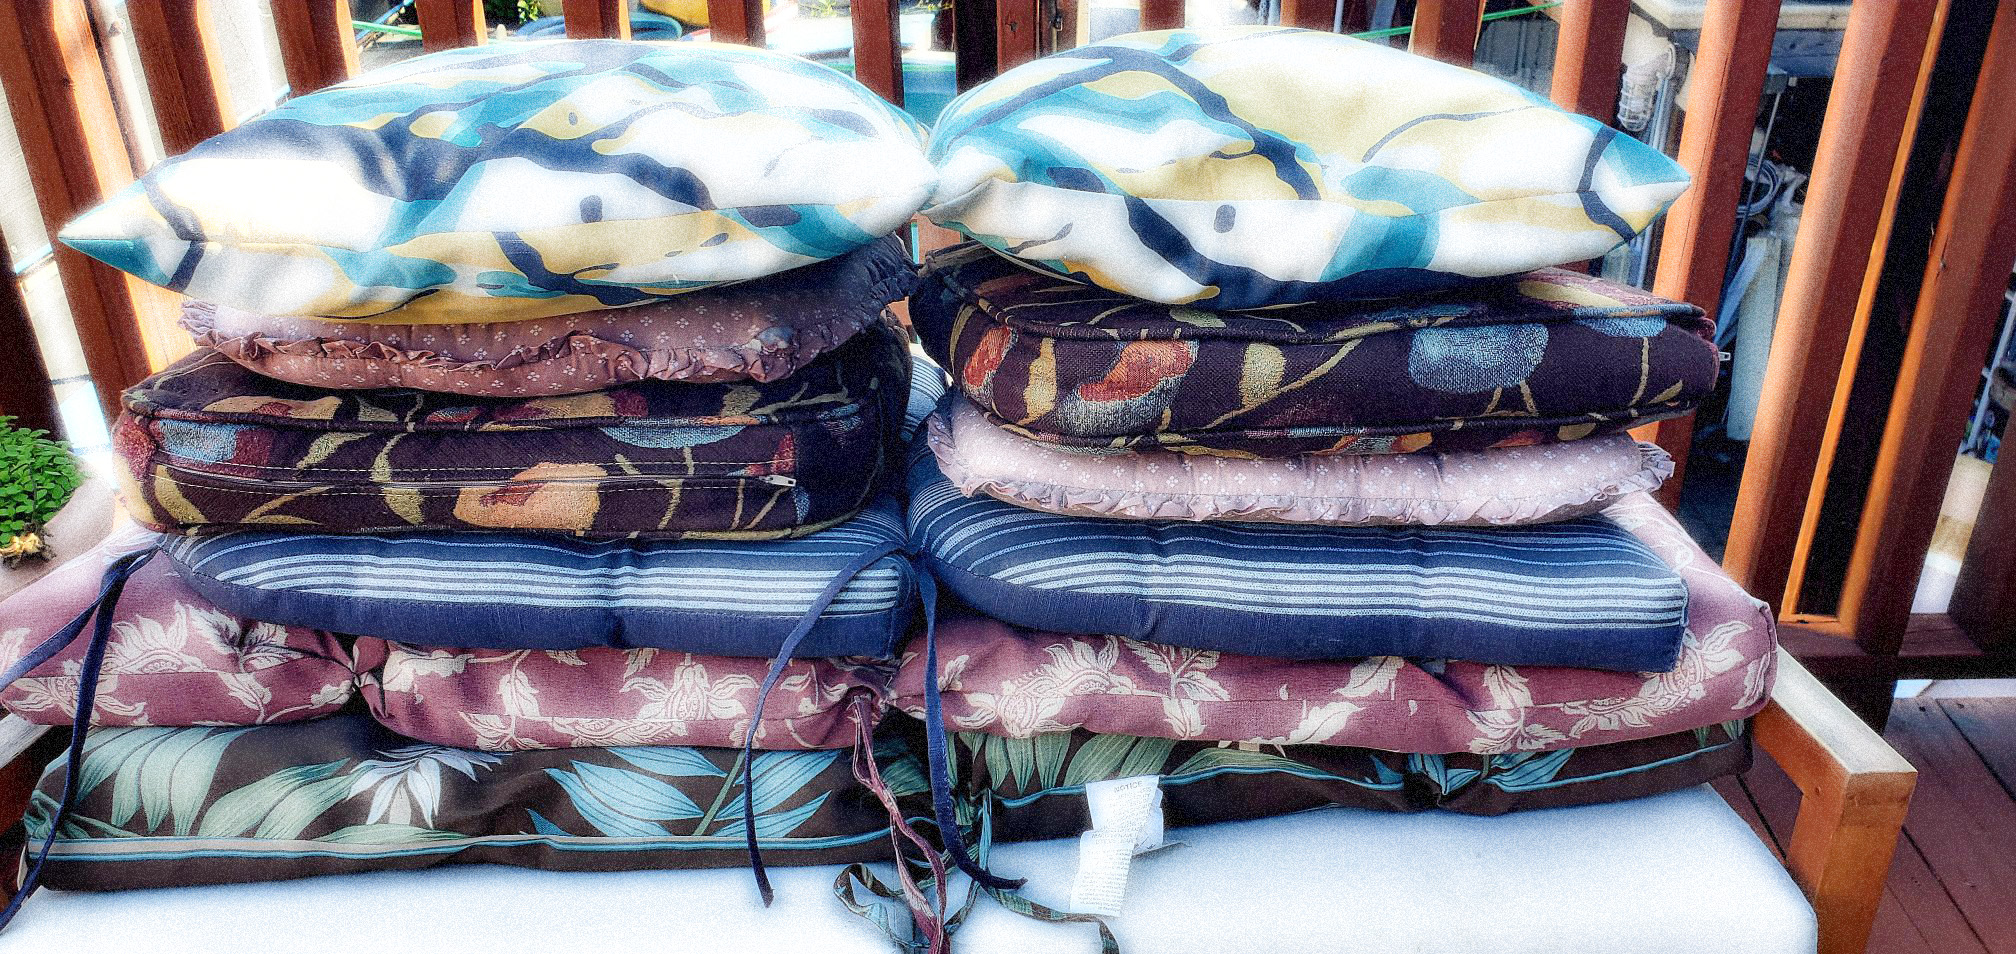 Stack of cushions of various colors and patterns